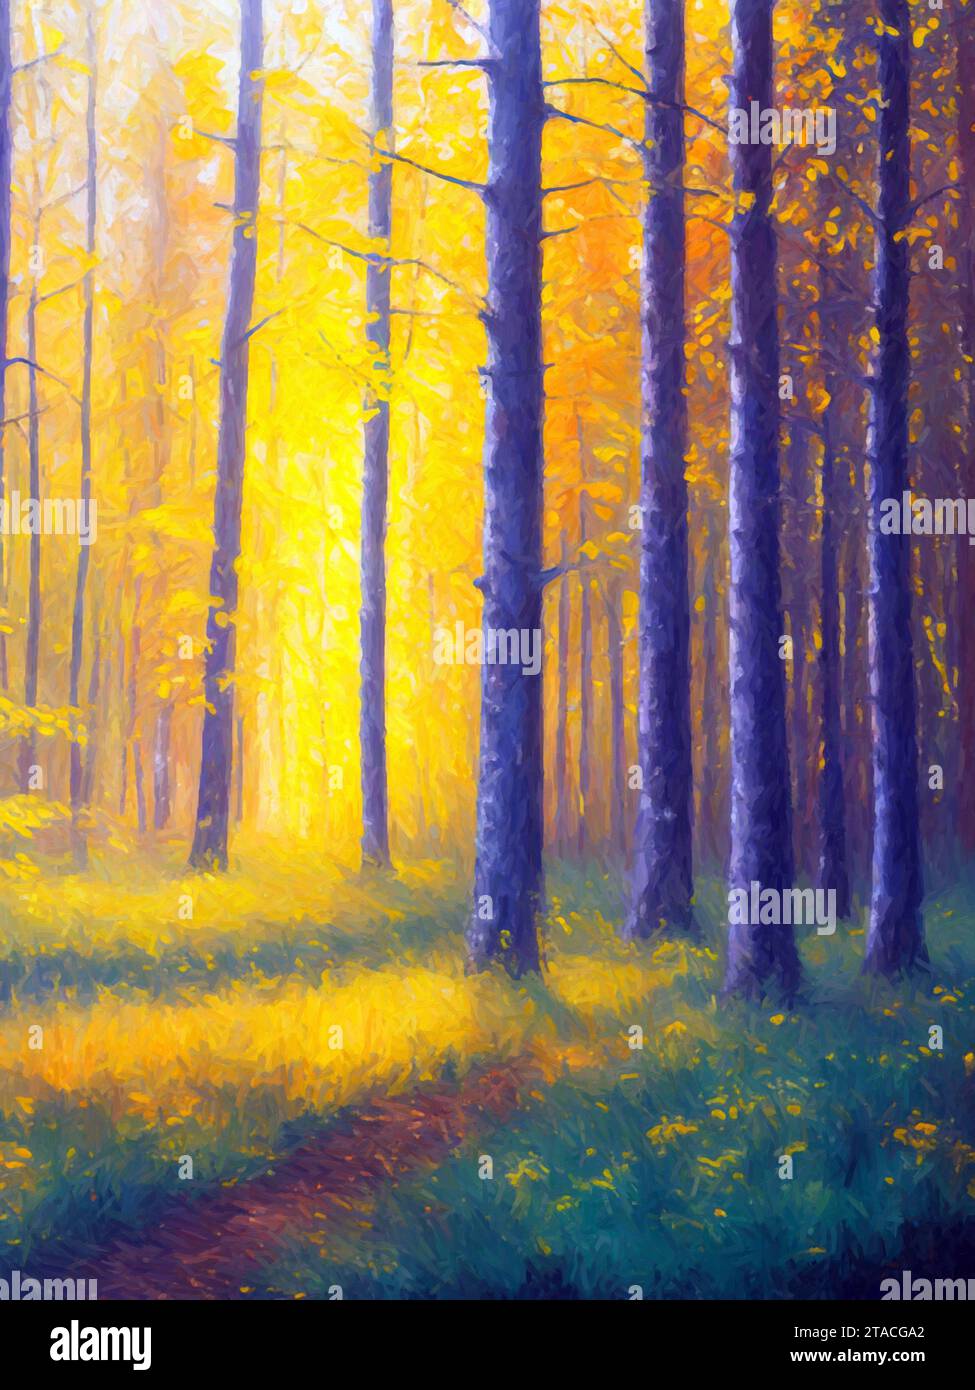 The forest lights Painting (oil on canvas). Stock Photo